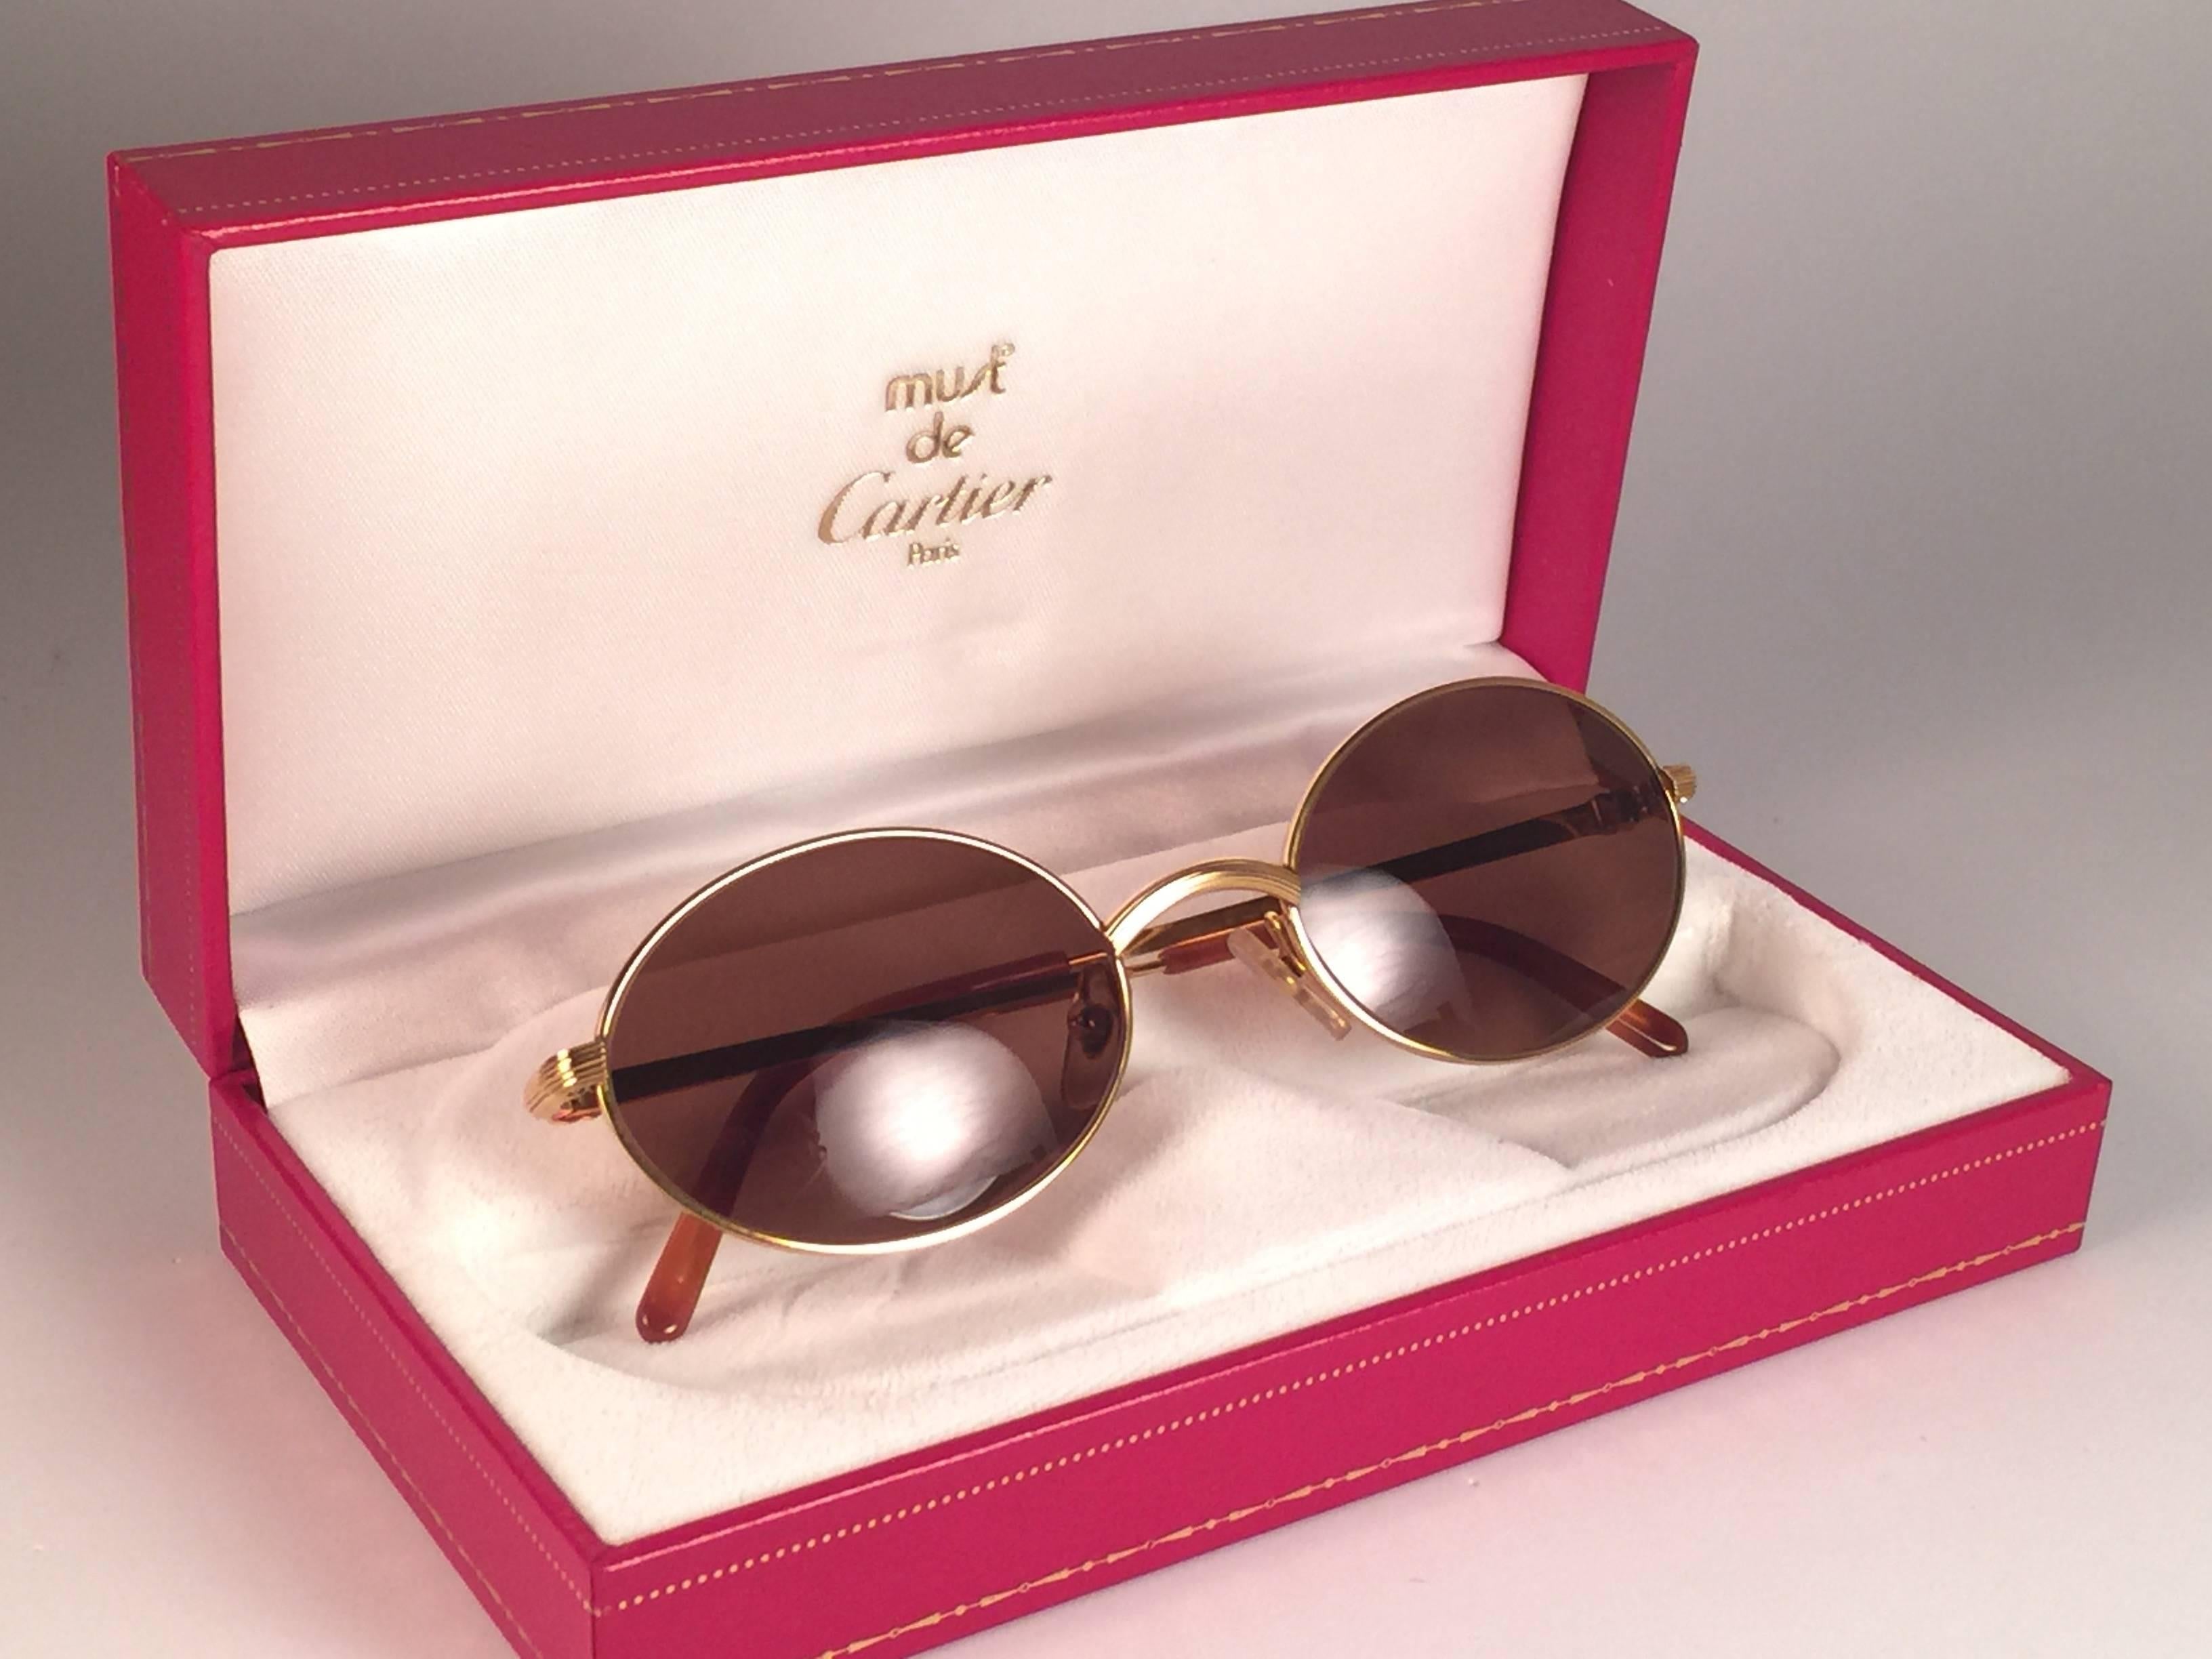 New 1990 Cartier Sorbonne Sunglasses with brown (uv protection) lenses. 
All hallmarks. 
Cartier gold signs on the ear paddles. 
These are like a pair of jewels on your nose. Please notice this pair is nearly 30 years old and may have minor sign of